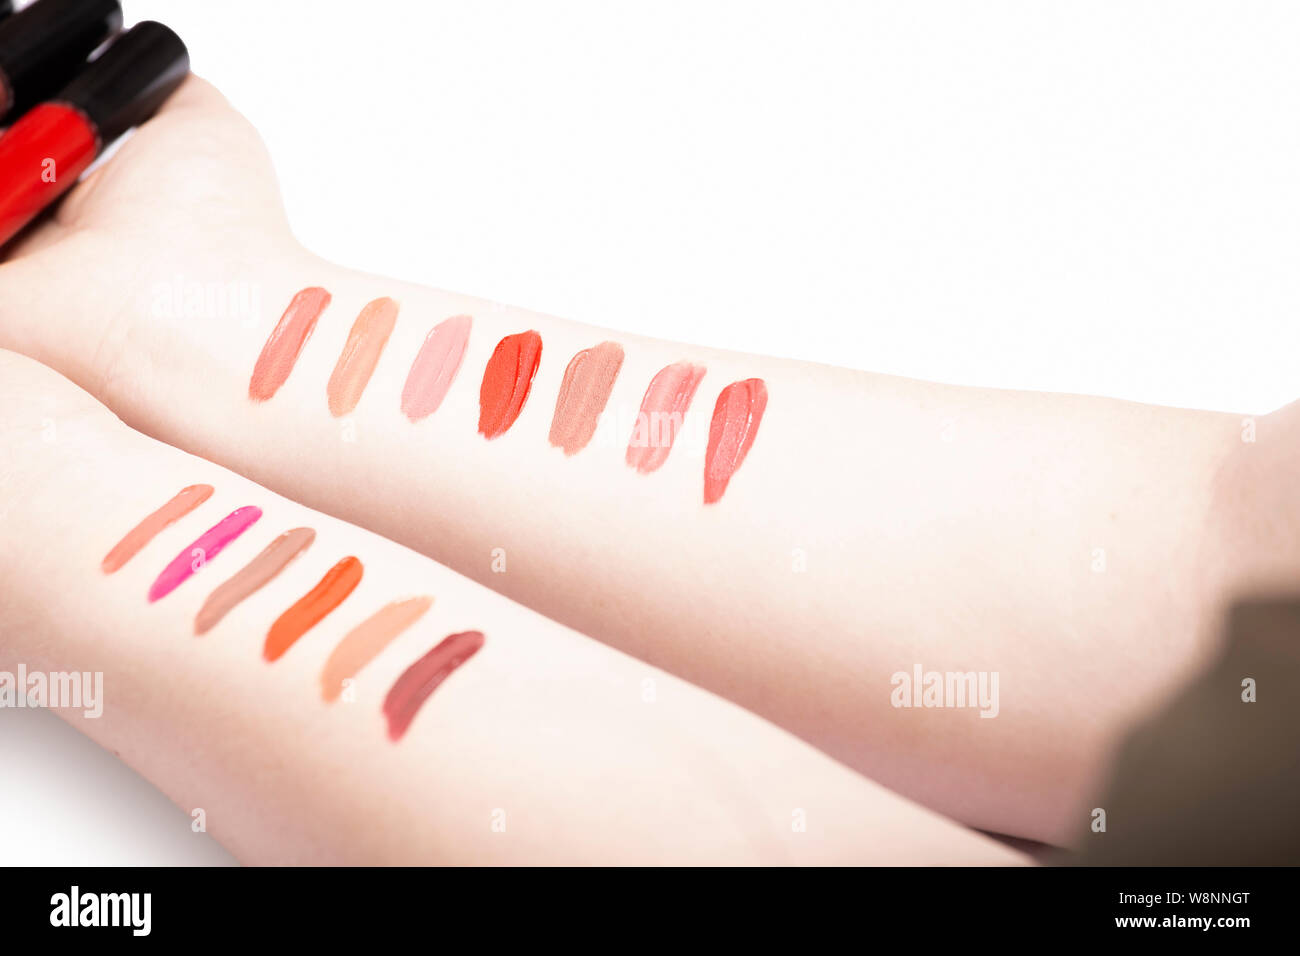 Woman hands with lipstick test strokes holding lip gloss containers, lipstick swatches on female arm Stock Photo